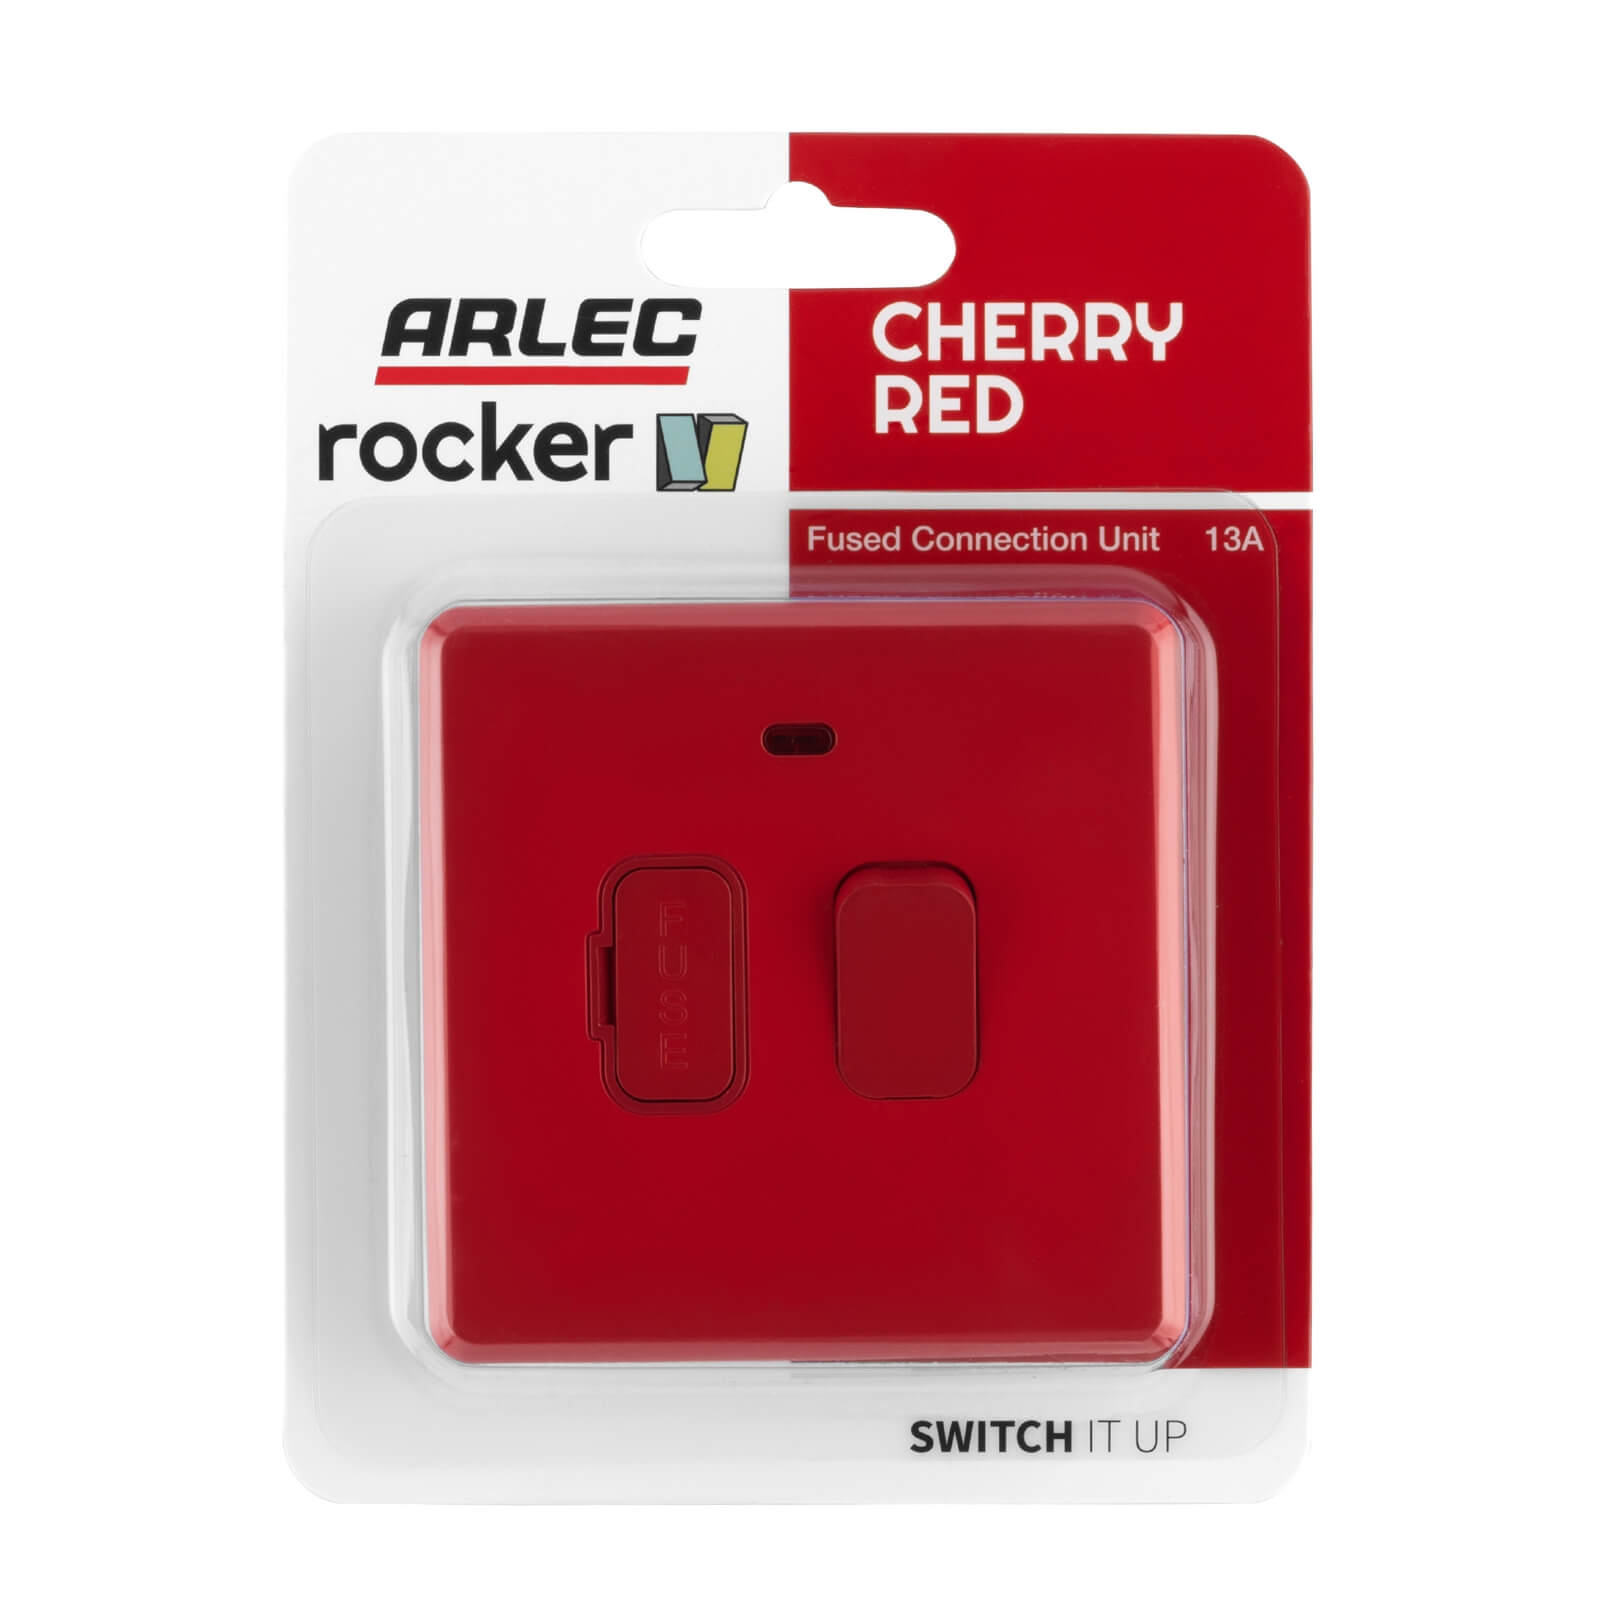 Arlec Rocker  13A Cherry Red Switched fused connection unit